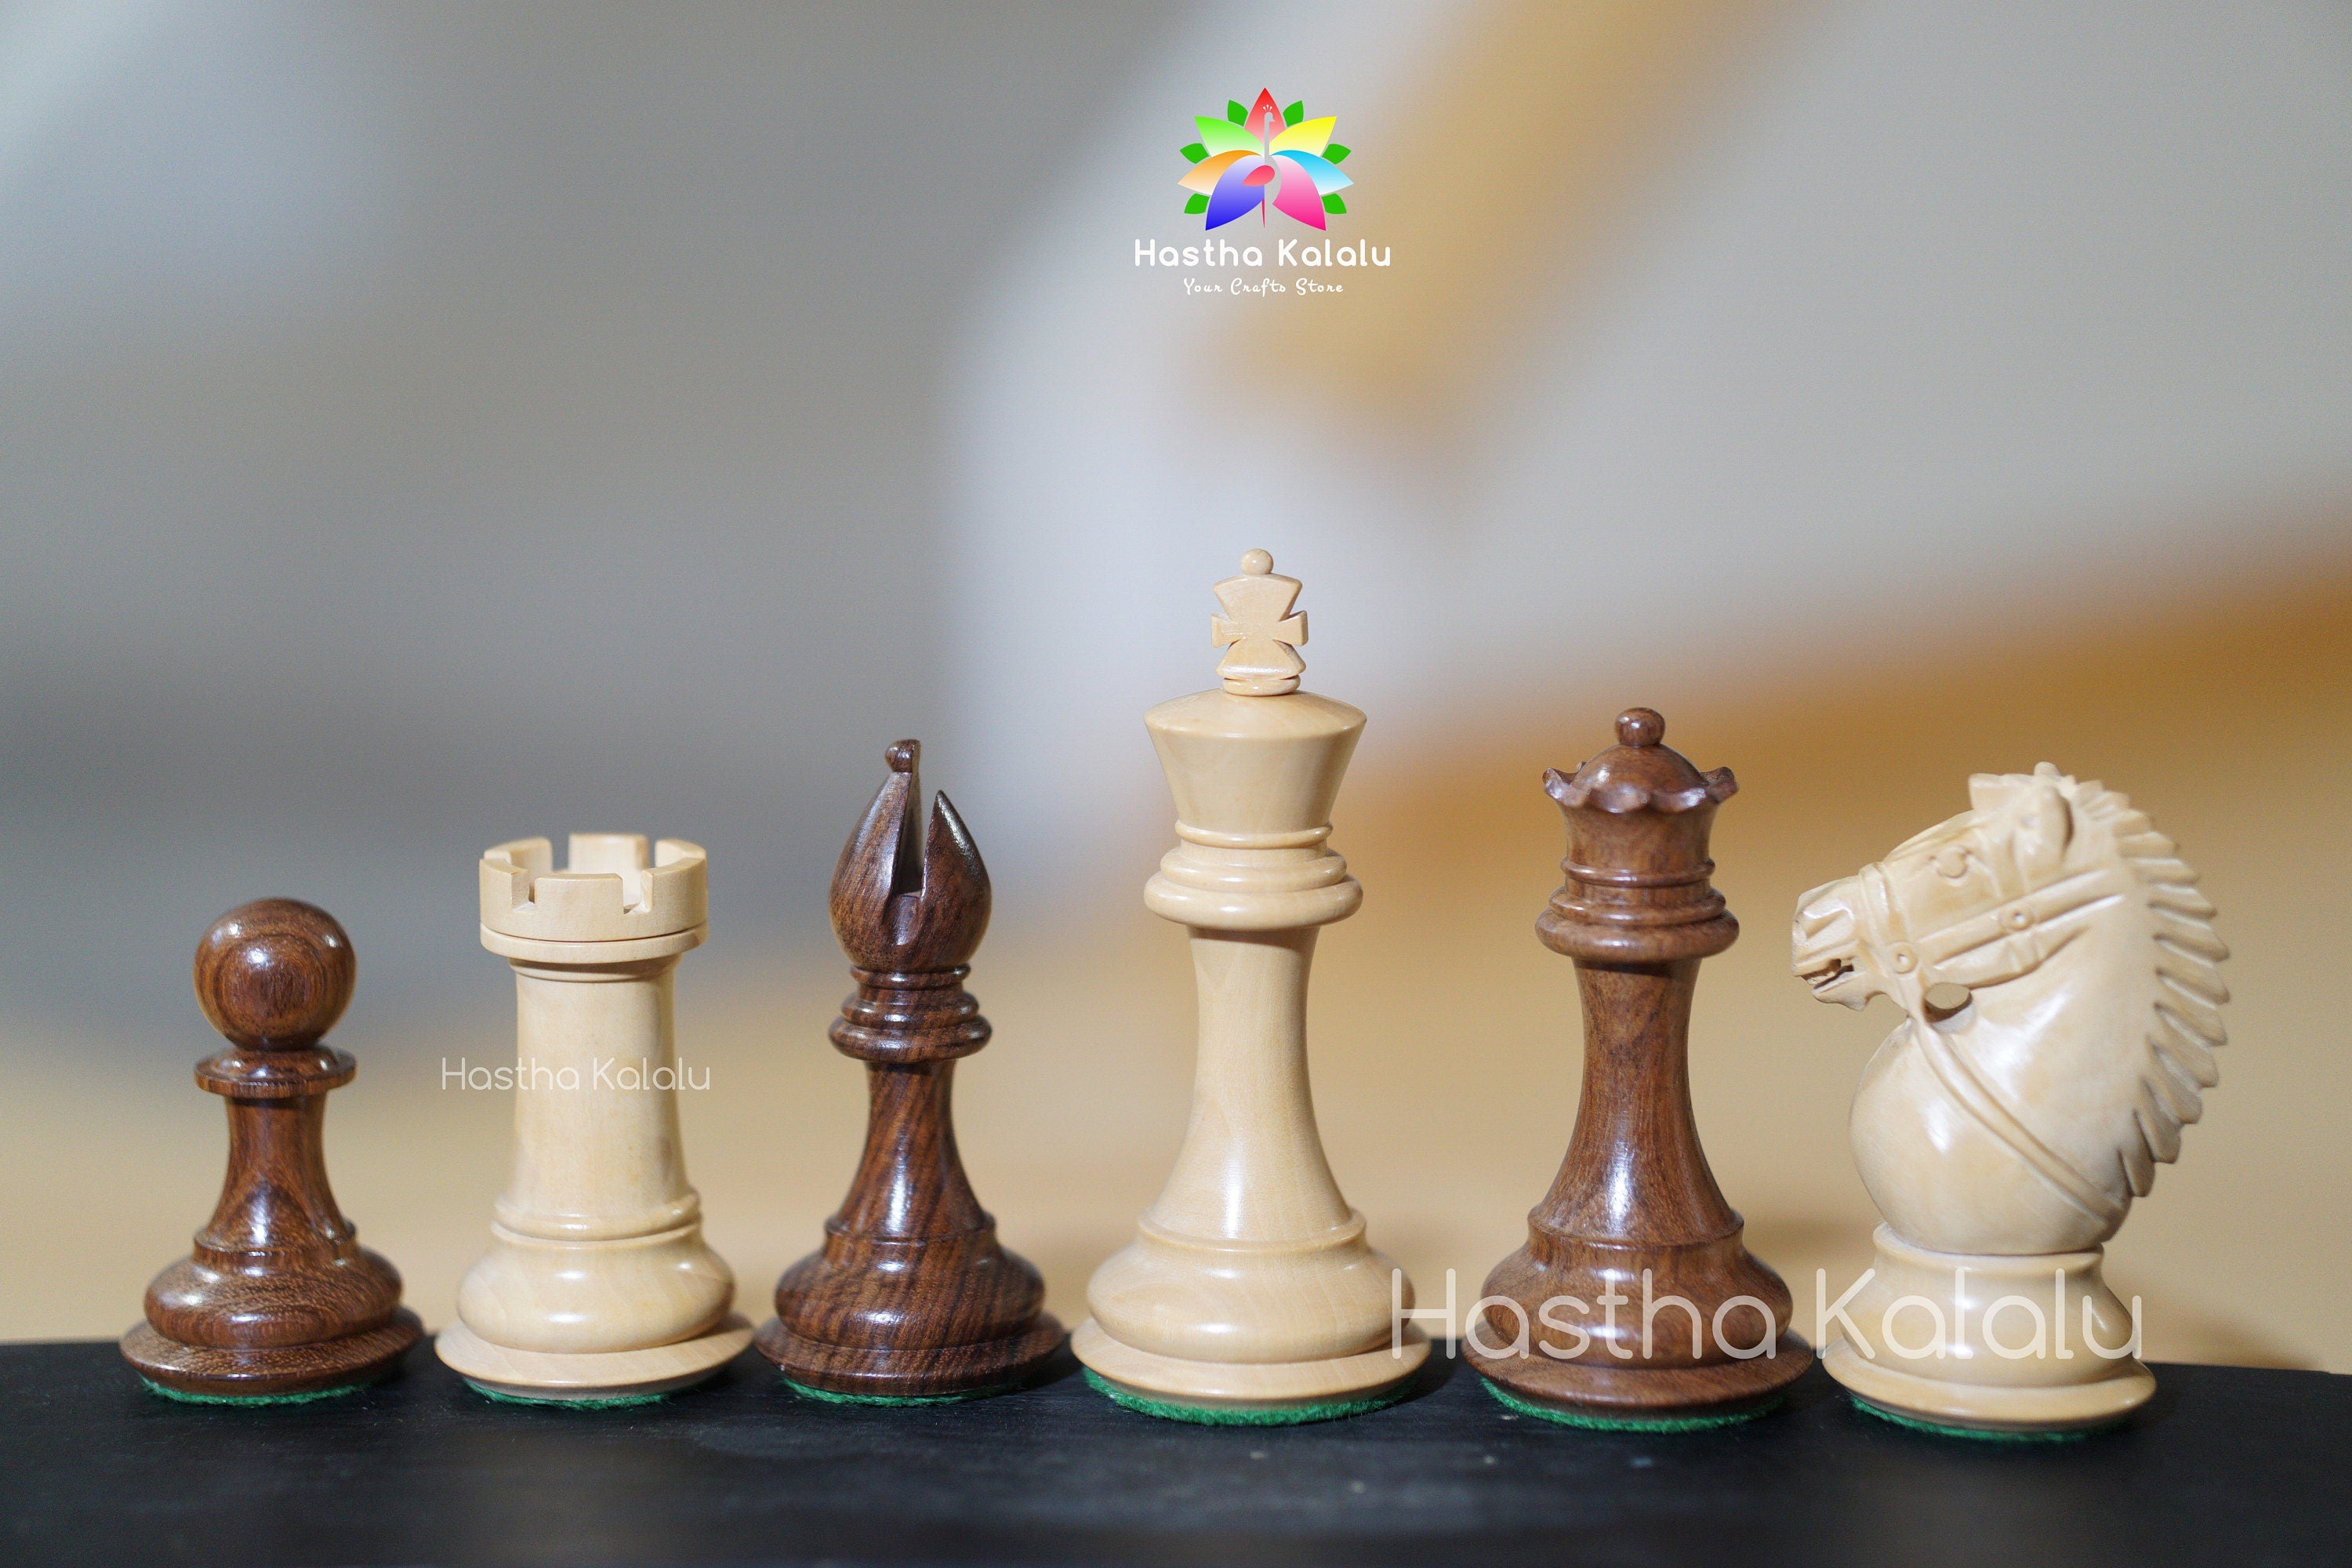 Tournament Series Staunton Chess Pieces with German Knight in Sheesham &  Box Wood - 3.75 King